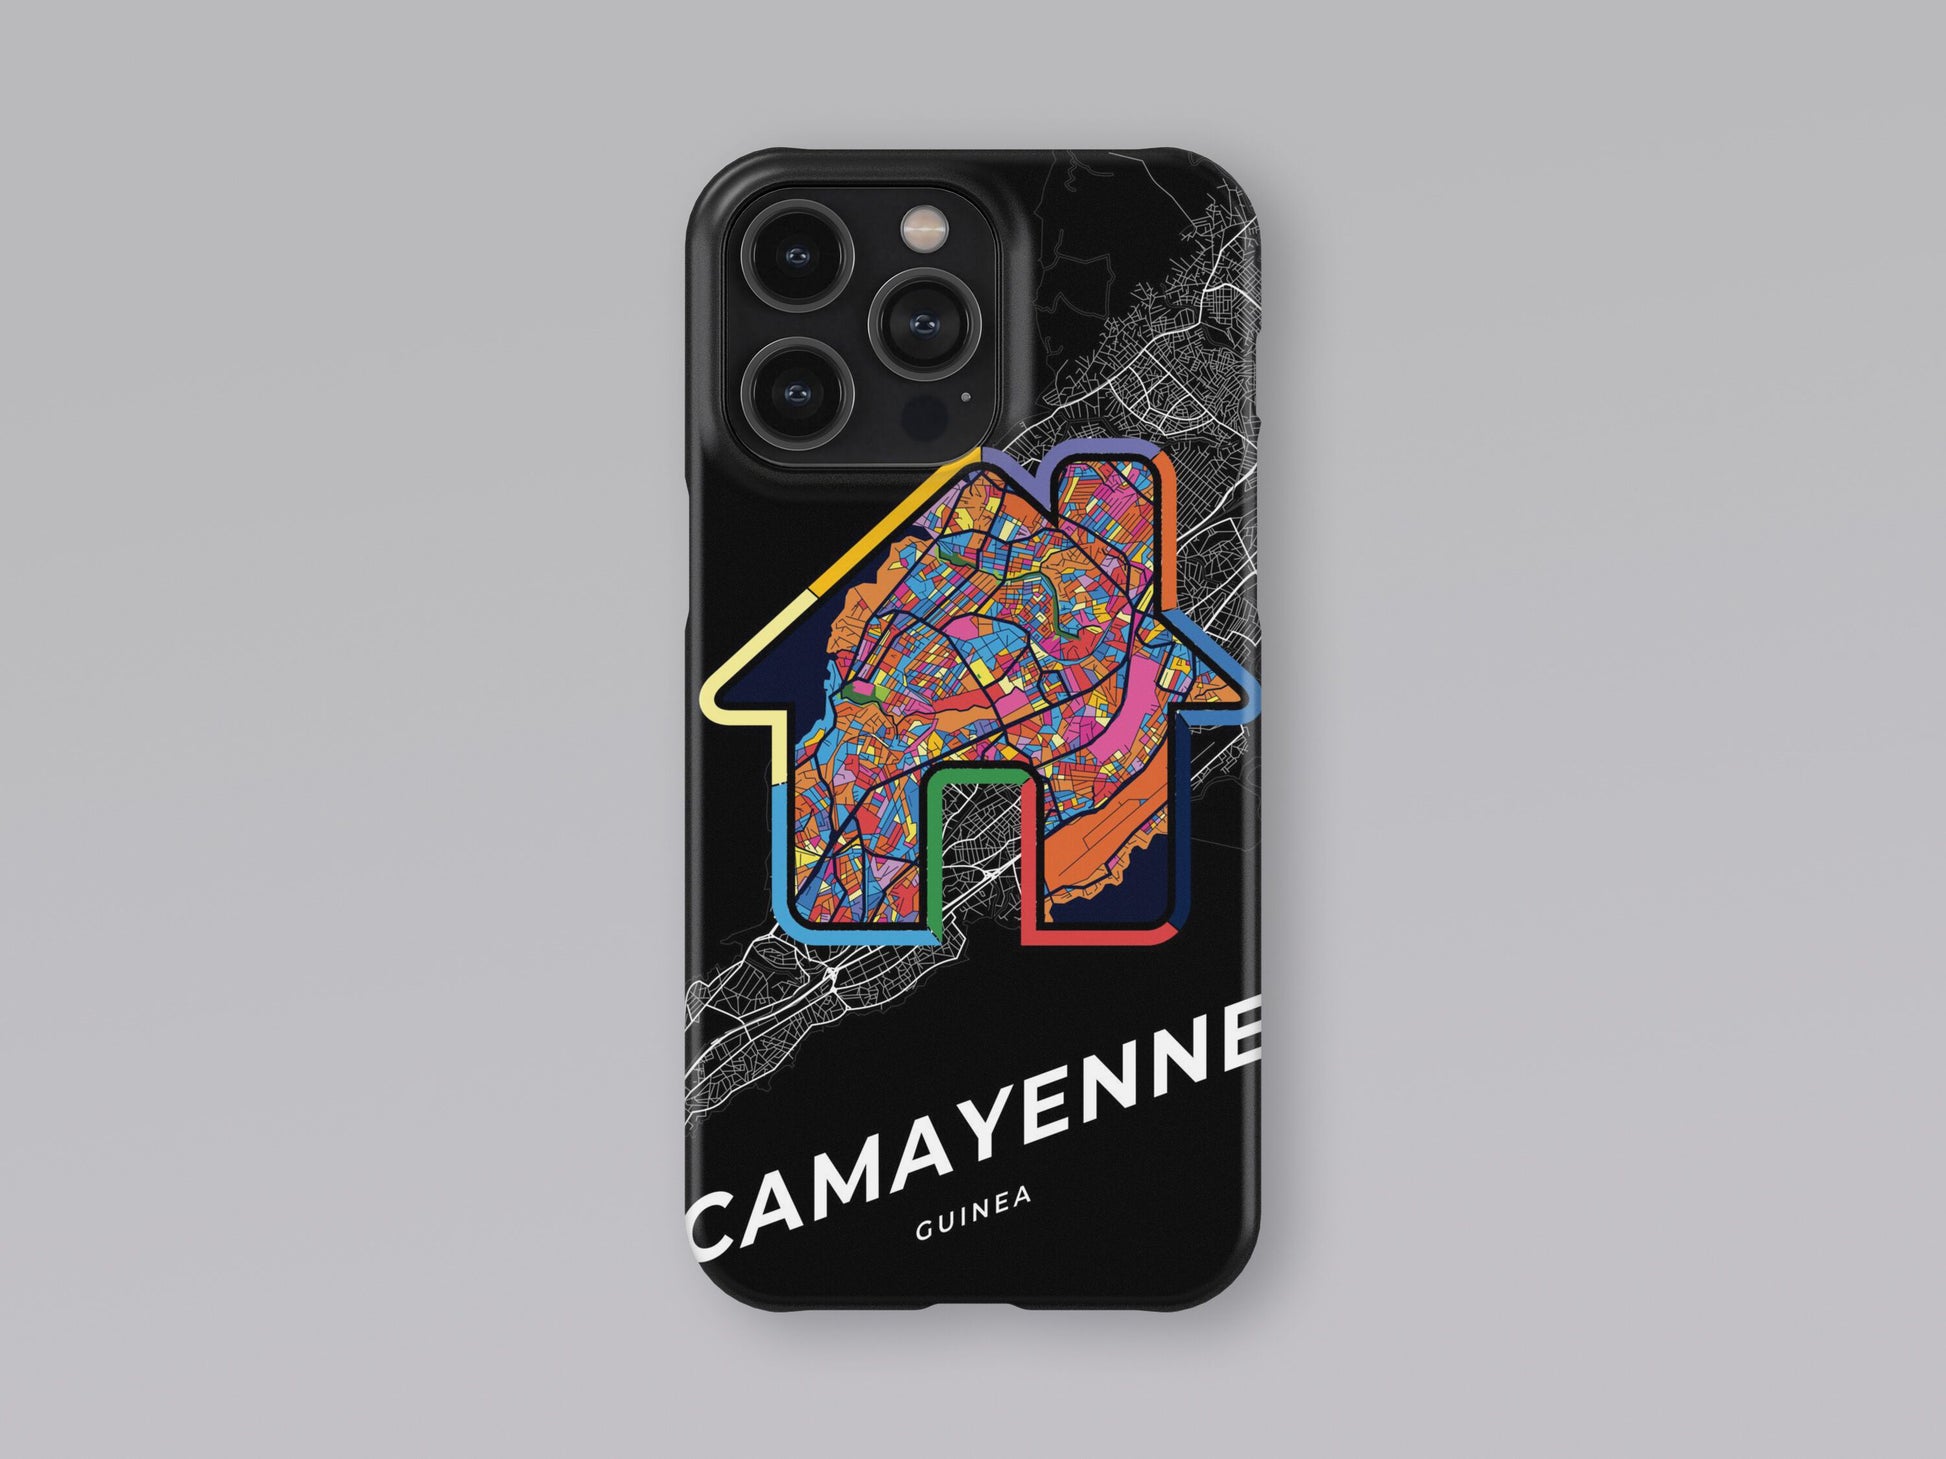 Camayenne Guinea slim phone case with colorful icon. Birthday, wedding or housewarming gift. Couple match cases. 3